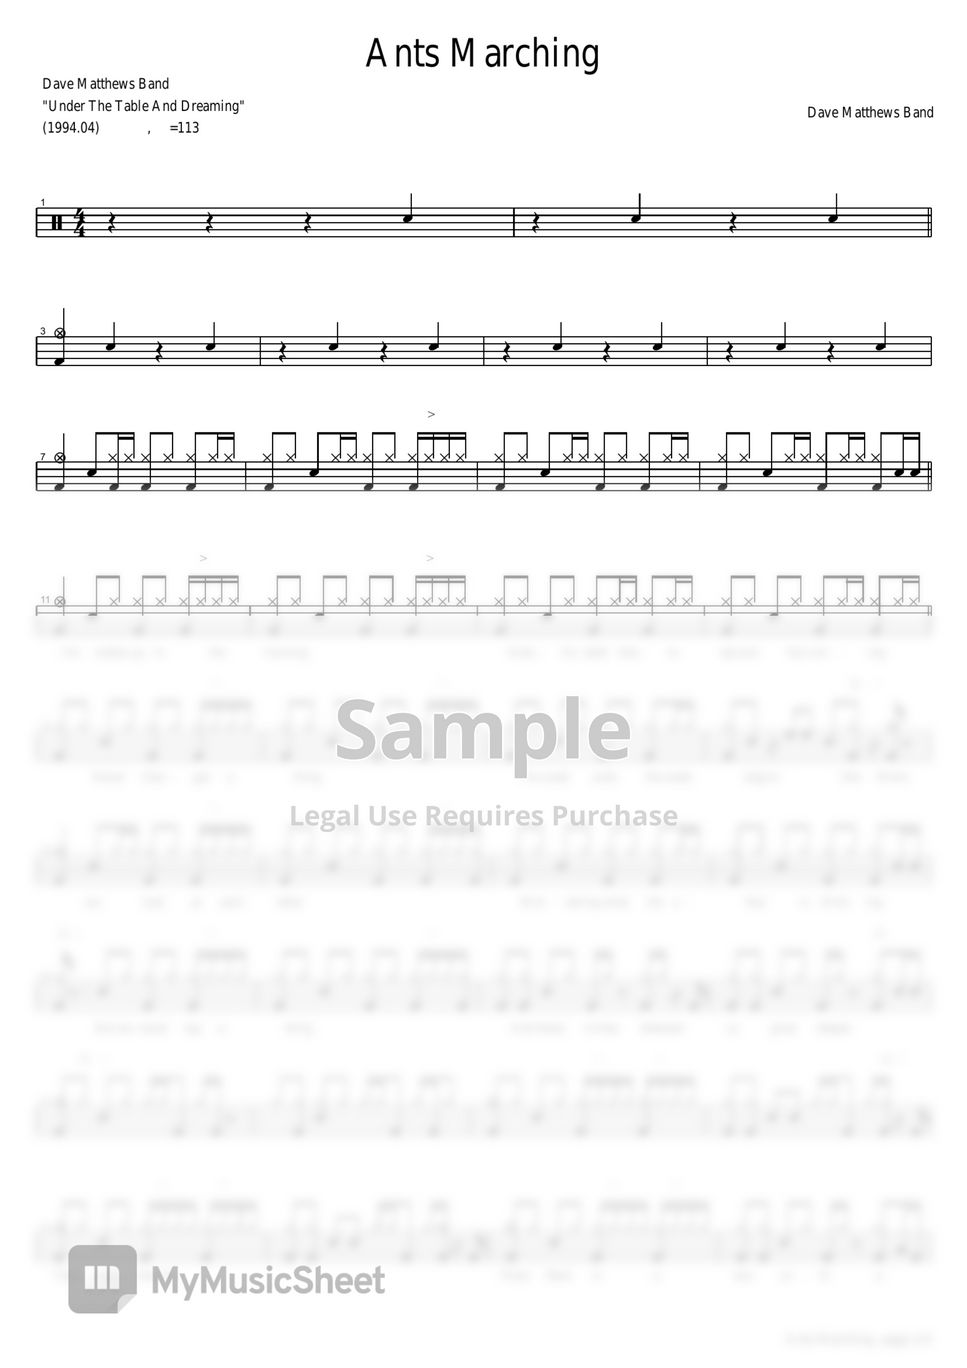 Dave Matthews Band - Ant`s Marching by COPYDRUM